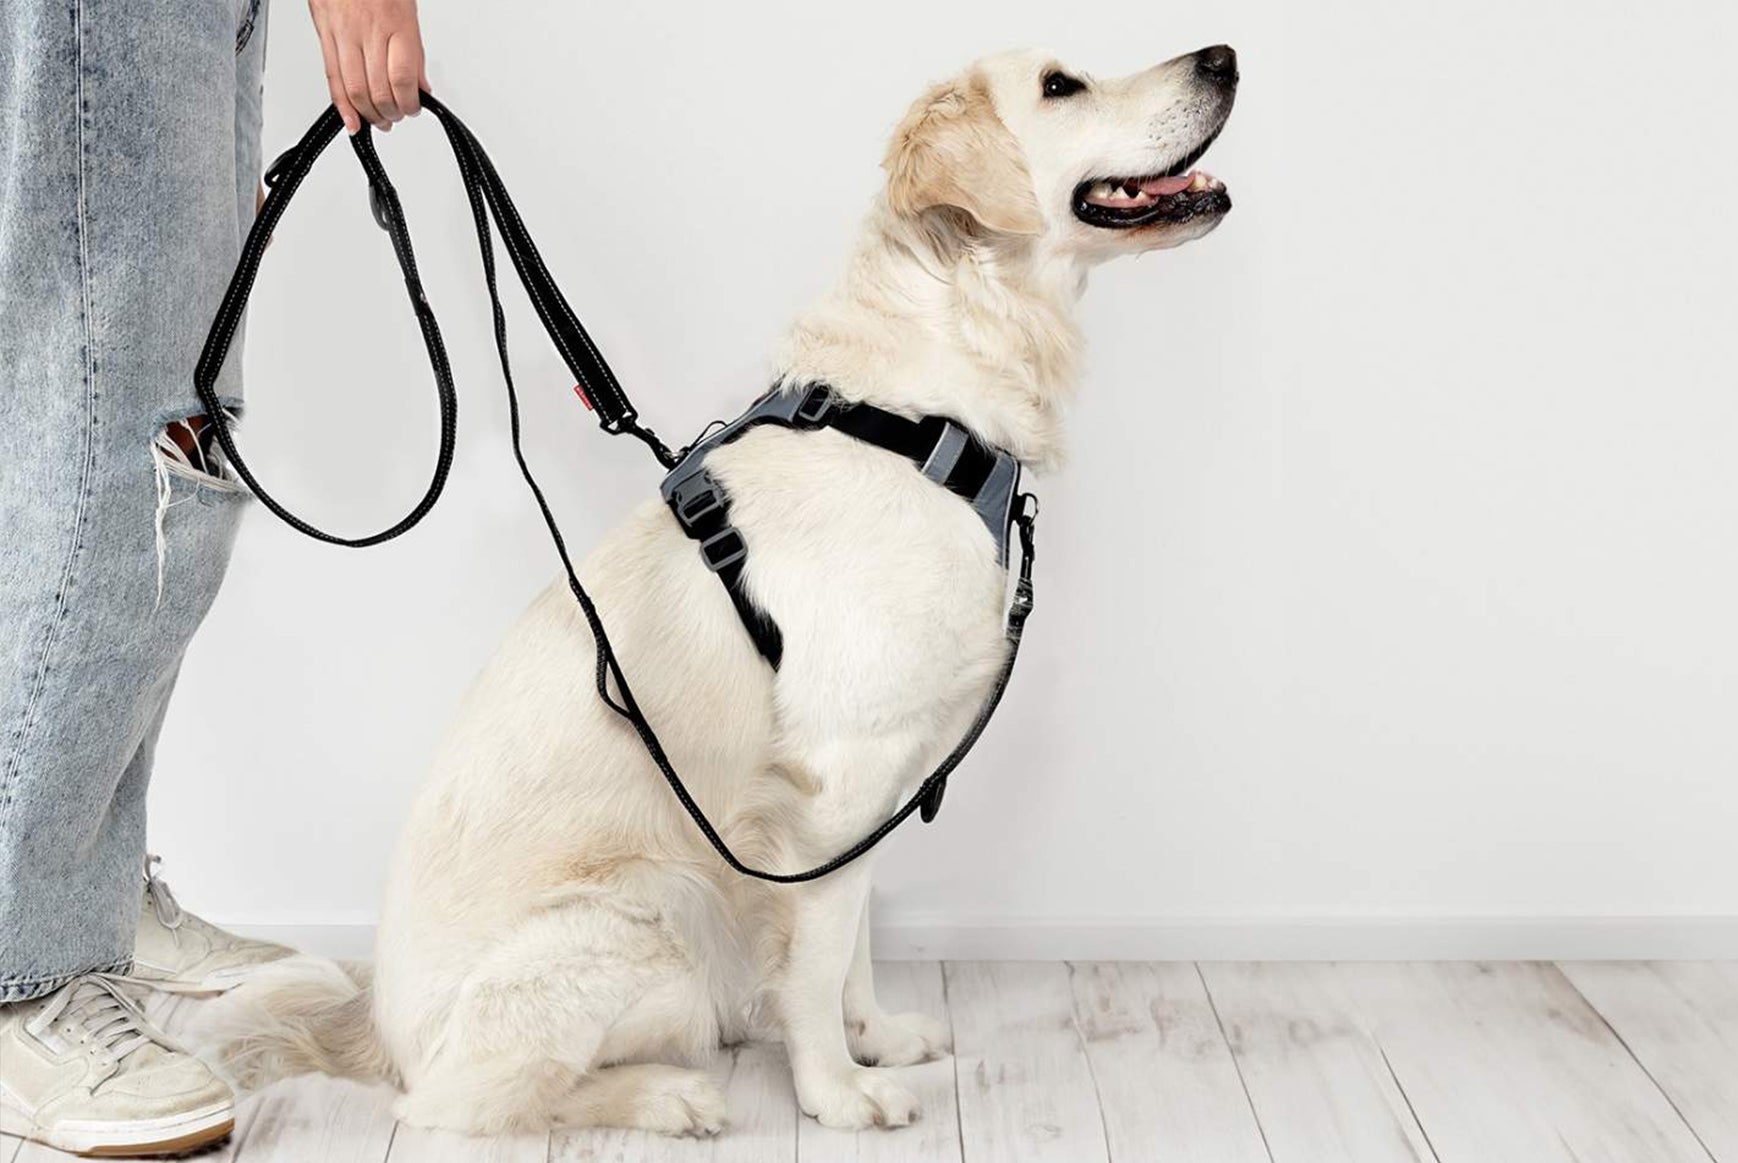 Walks made easy. Stop your dog pulling